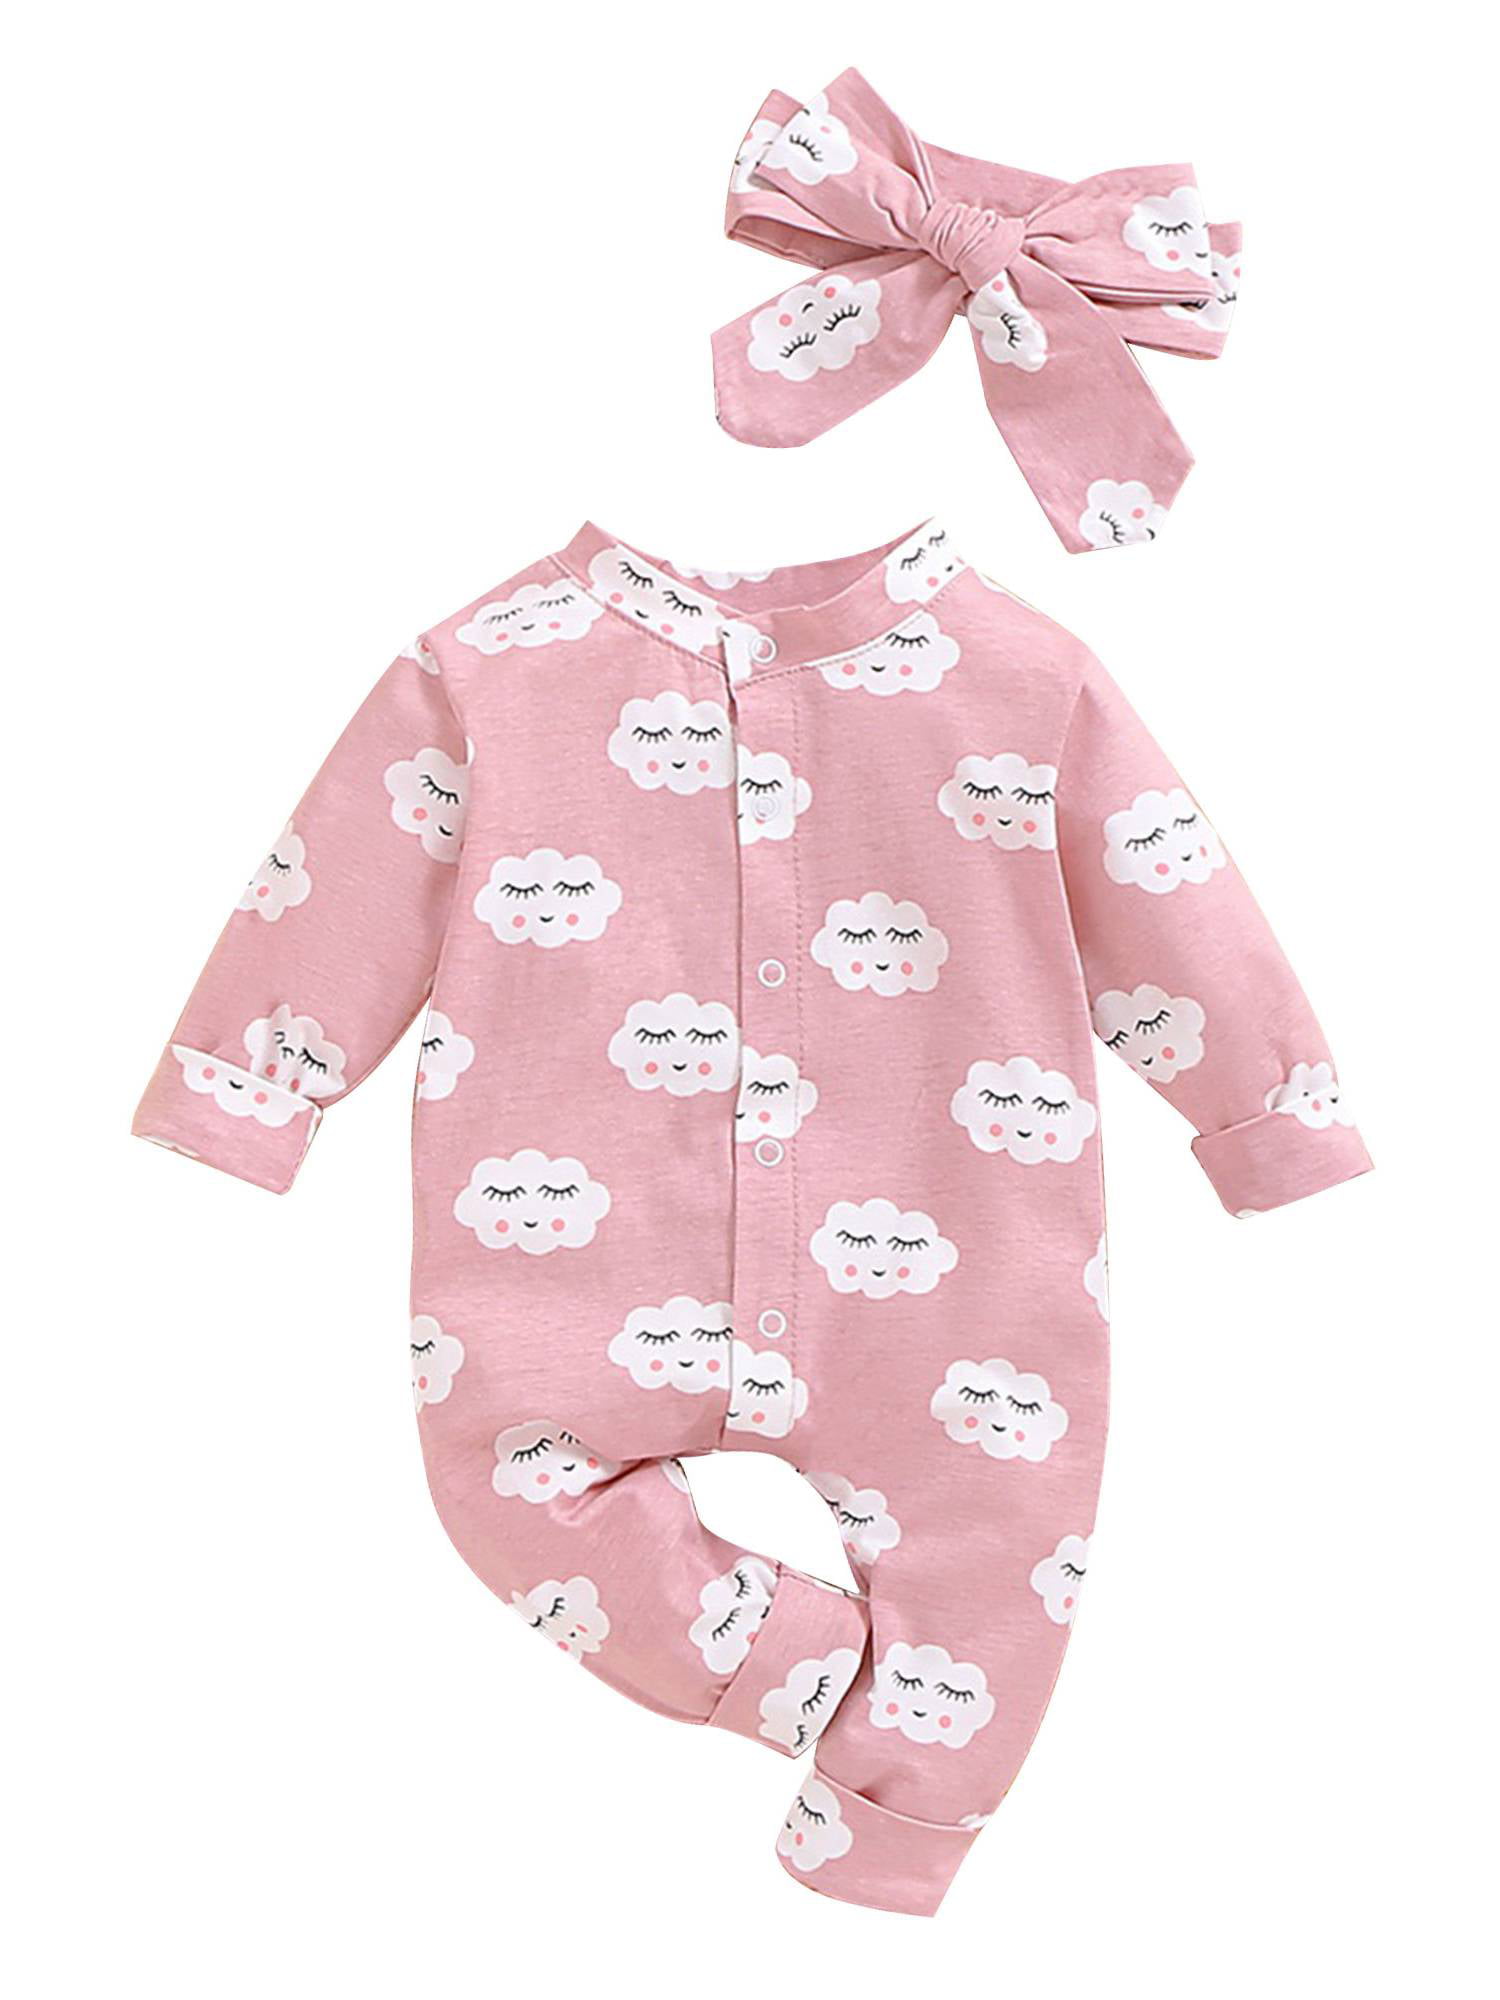 Baby Girl Romper Newborn Girl Cotton One Piece Infant Girl Long Sleeve Onesies Cute Pink Jumpsuit 0-18 Months